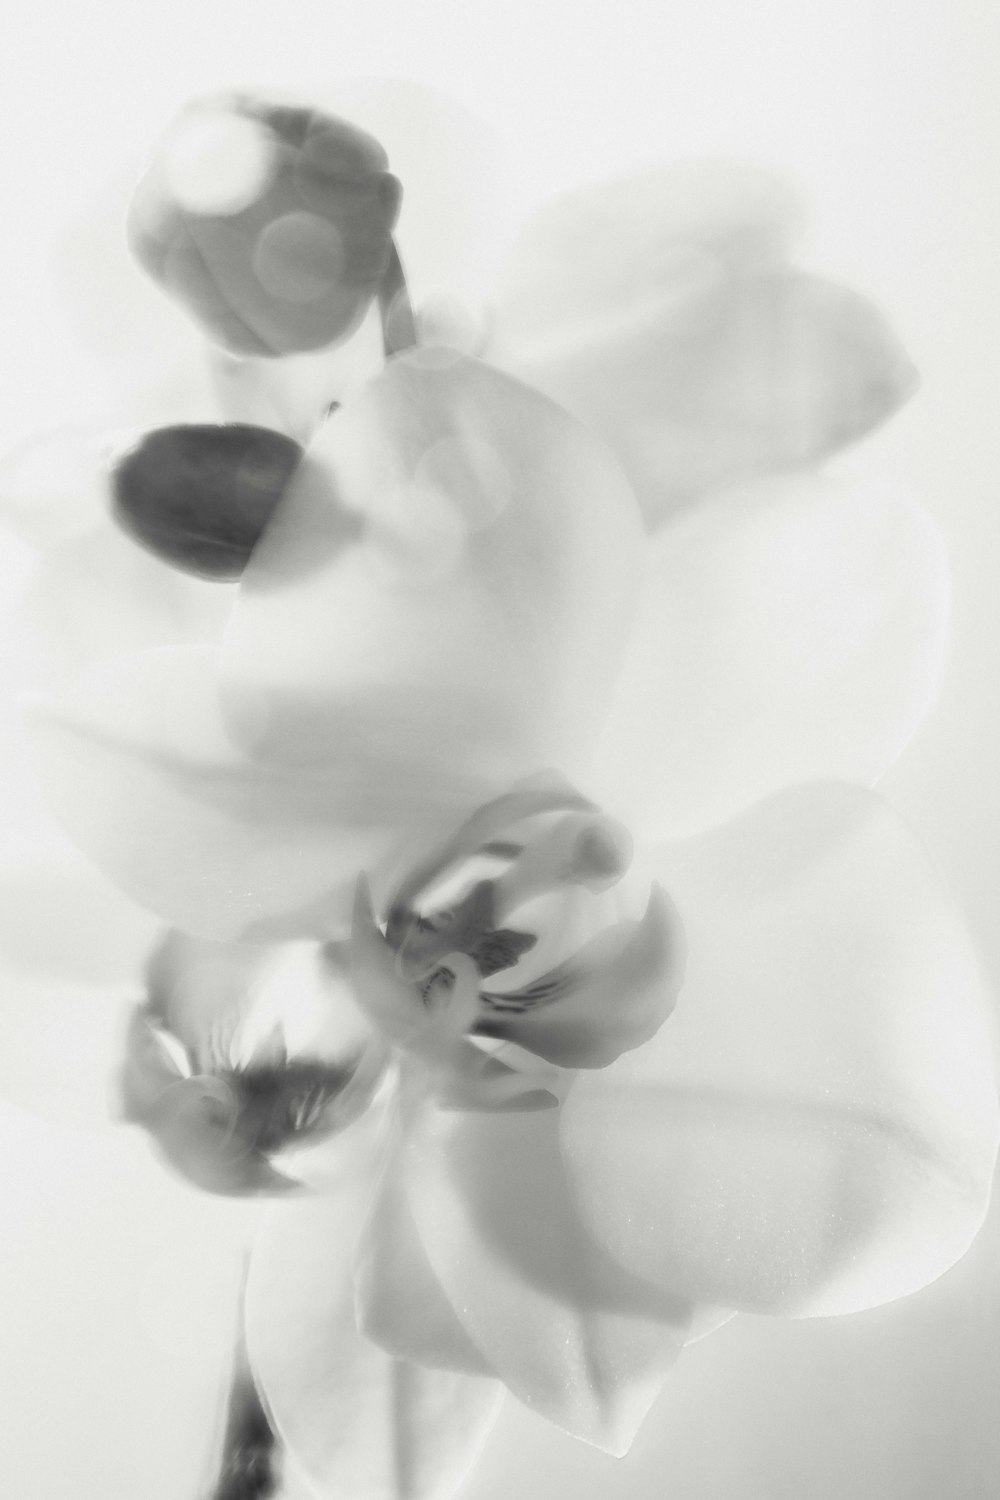 a black and white photo of flowers in a vase